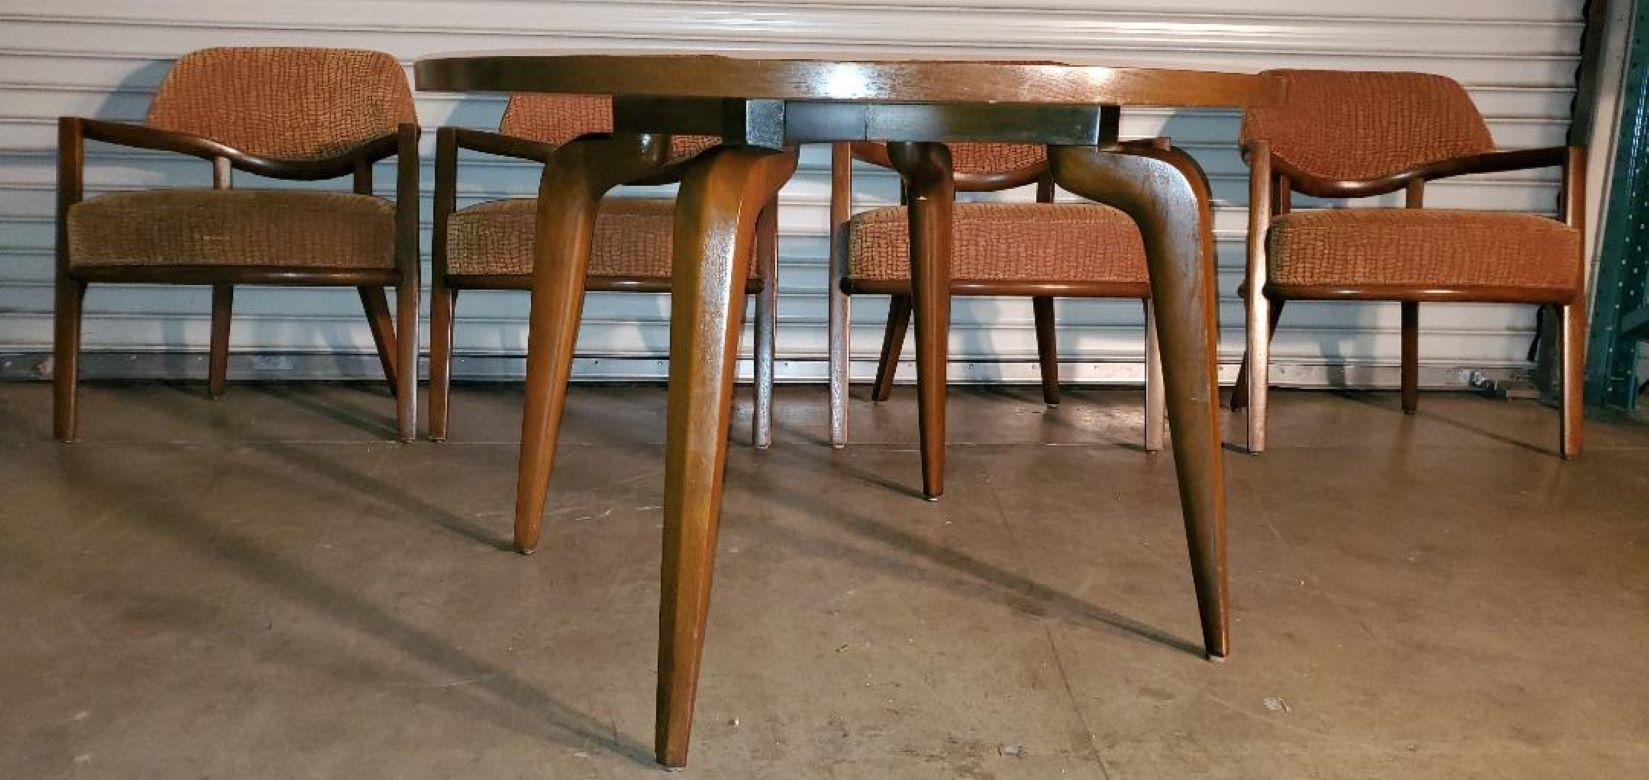 RARE 1950s Maurice Bailey Monteverdi Young Card Table & 4 Maurice Bailey Chairs For Sale 11